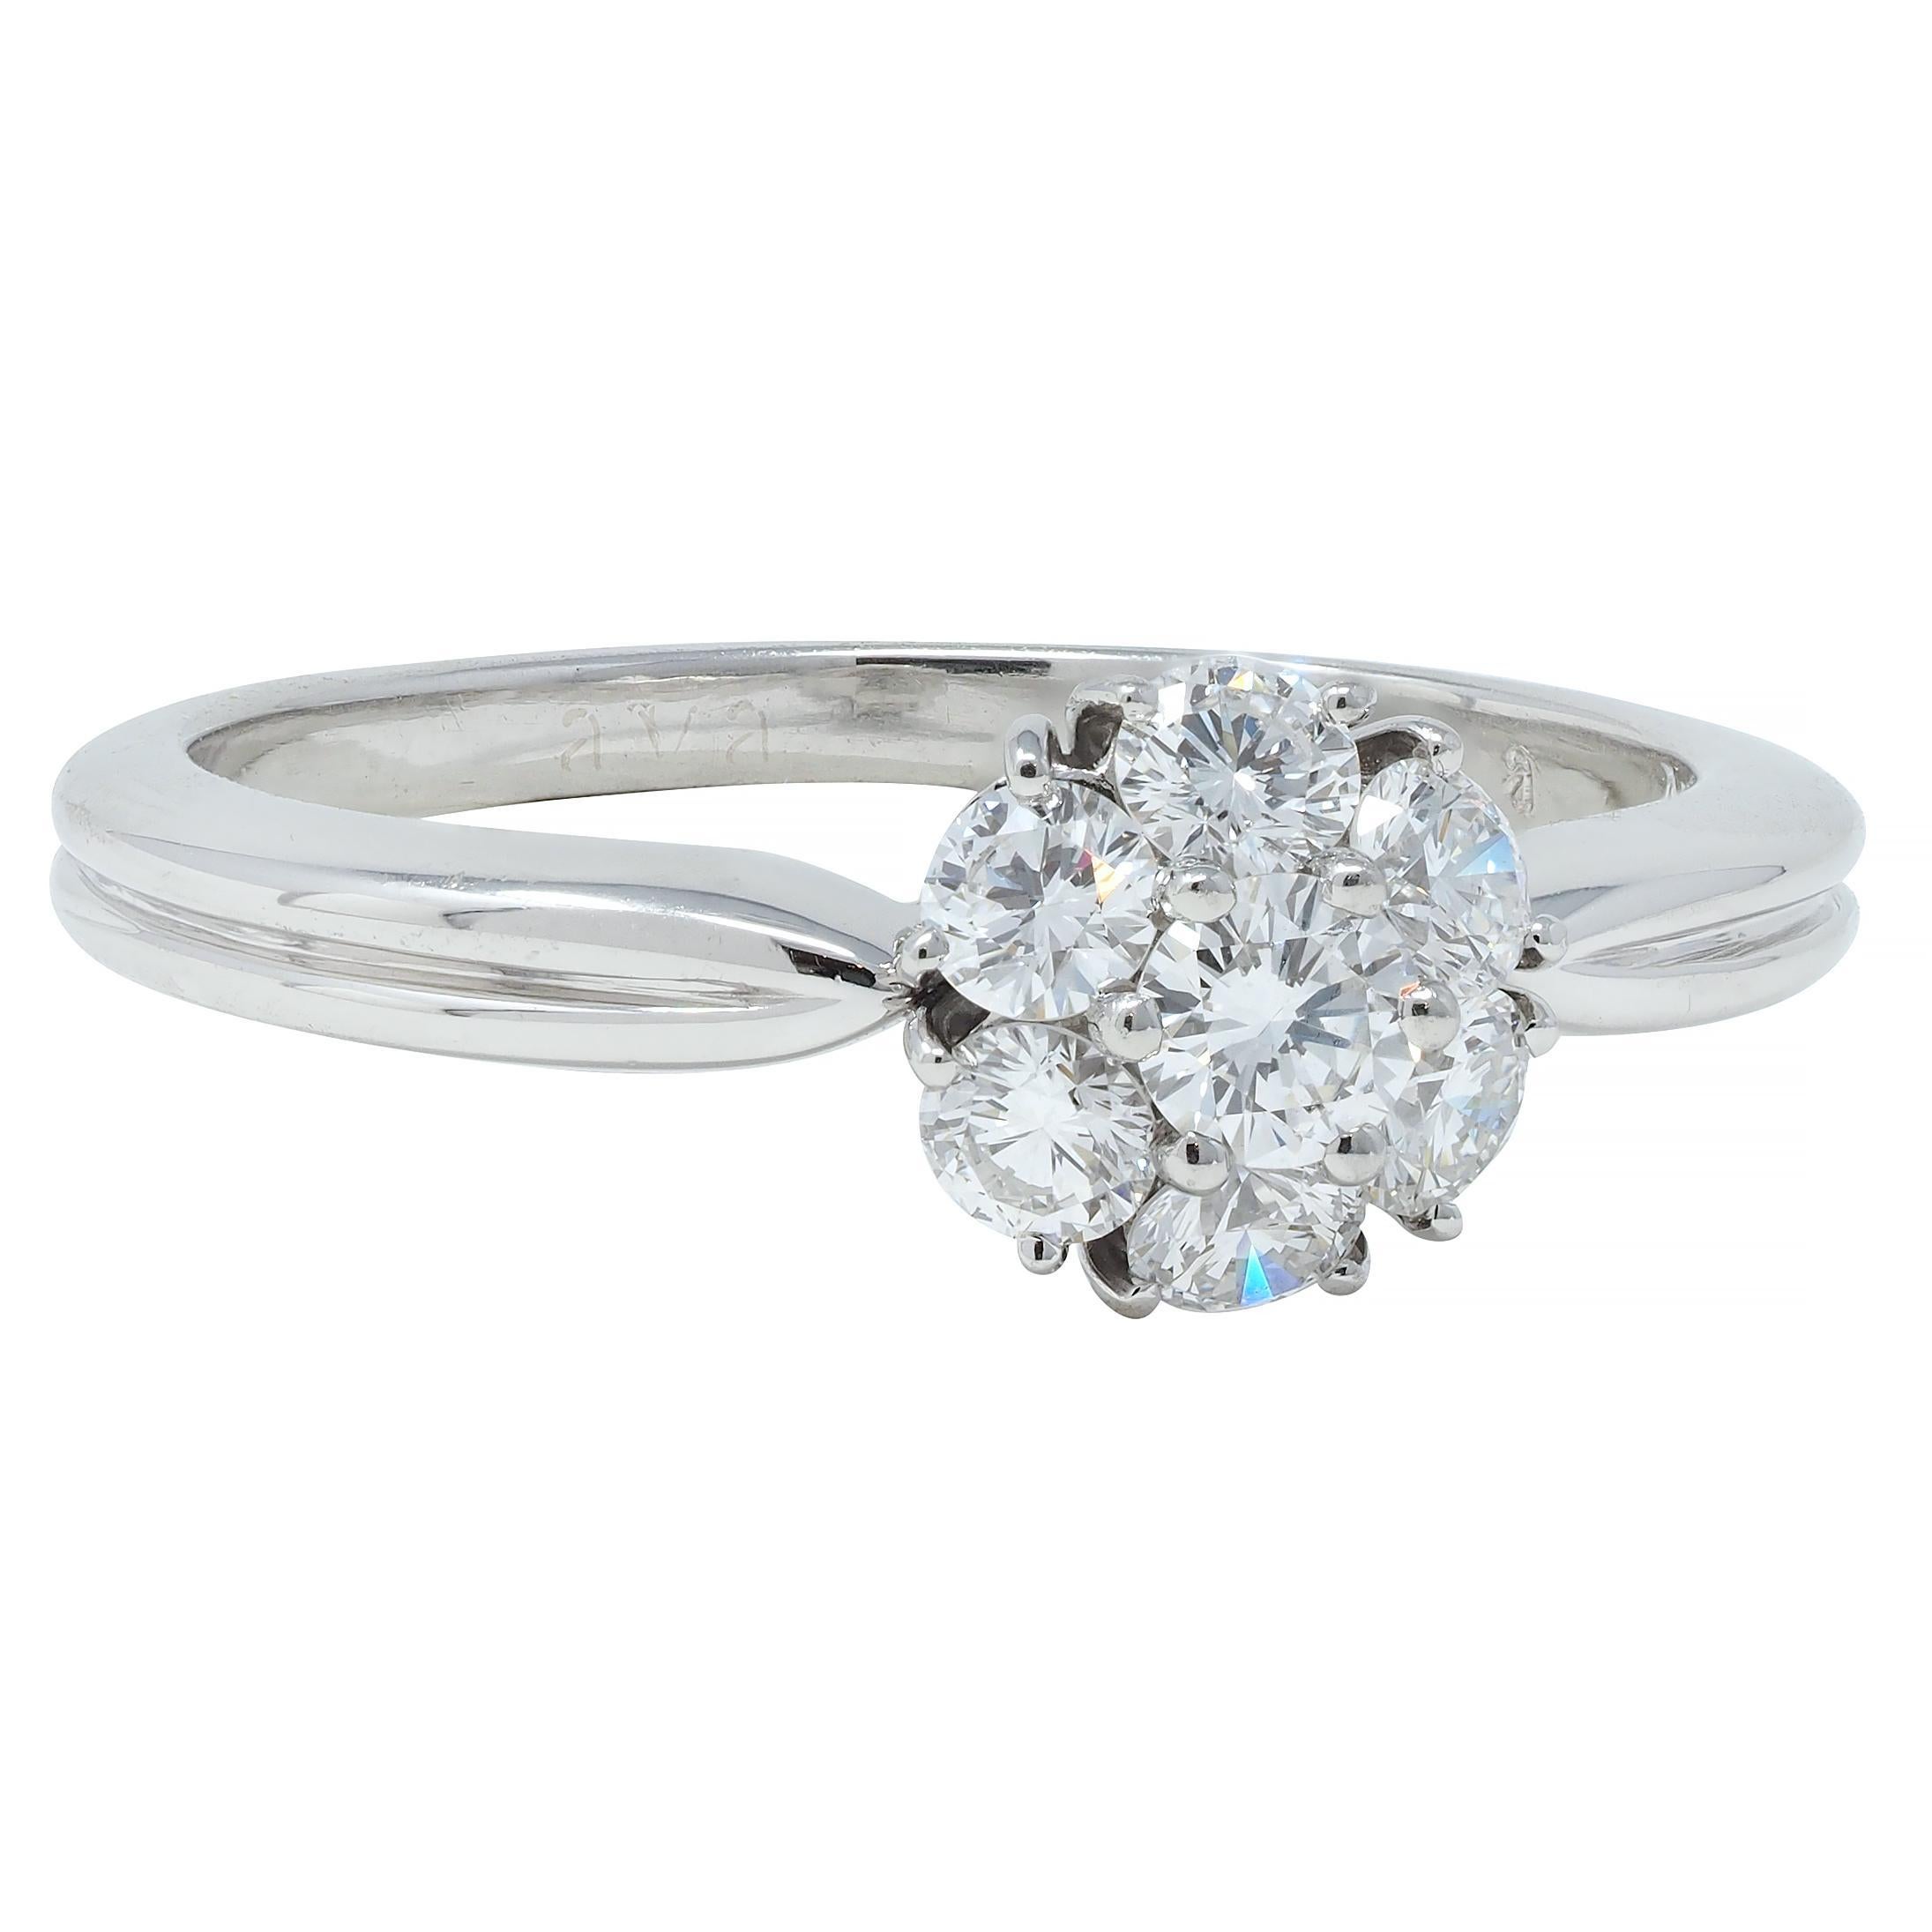 Featuring round brilliant cut diamonds clustered as a floral motif - weighing approximately 0.46 carat total 
G/H in color with VS clarity - all prong set 
Flanked by grooved tapered shoulders
Stamped for platinum
Numbered and fully signed Van Cleef